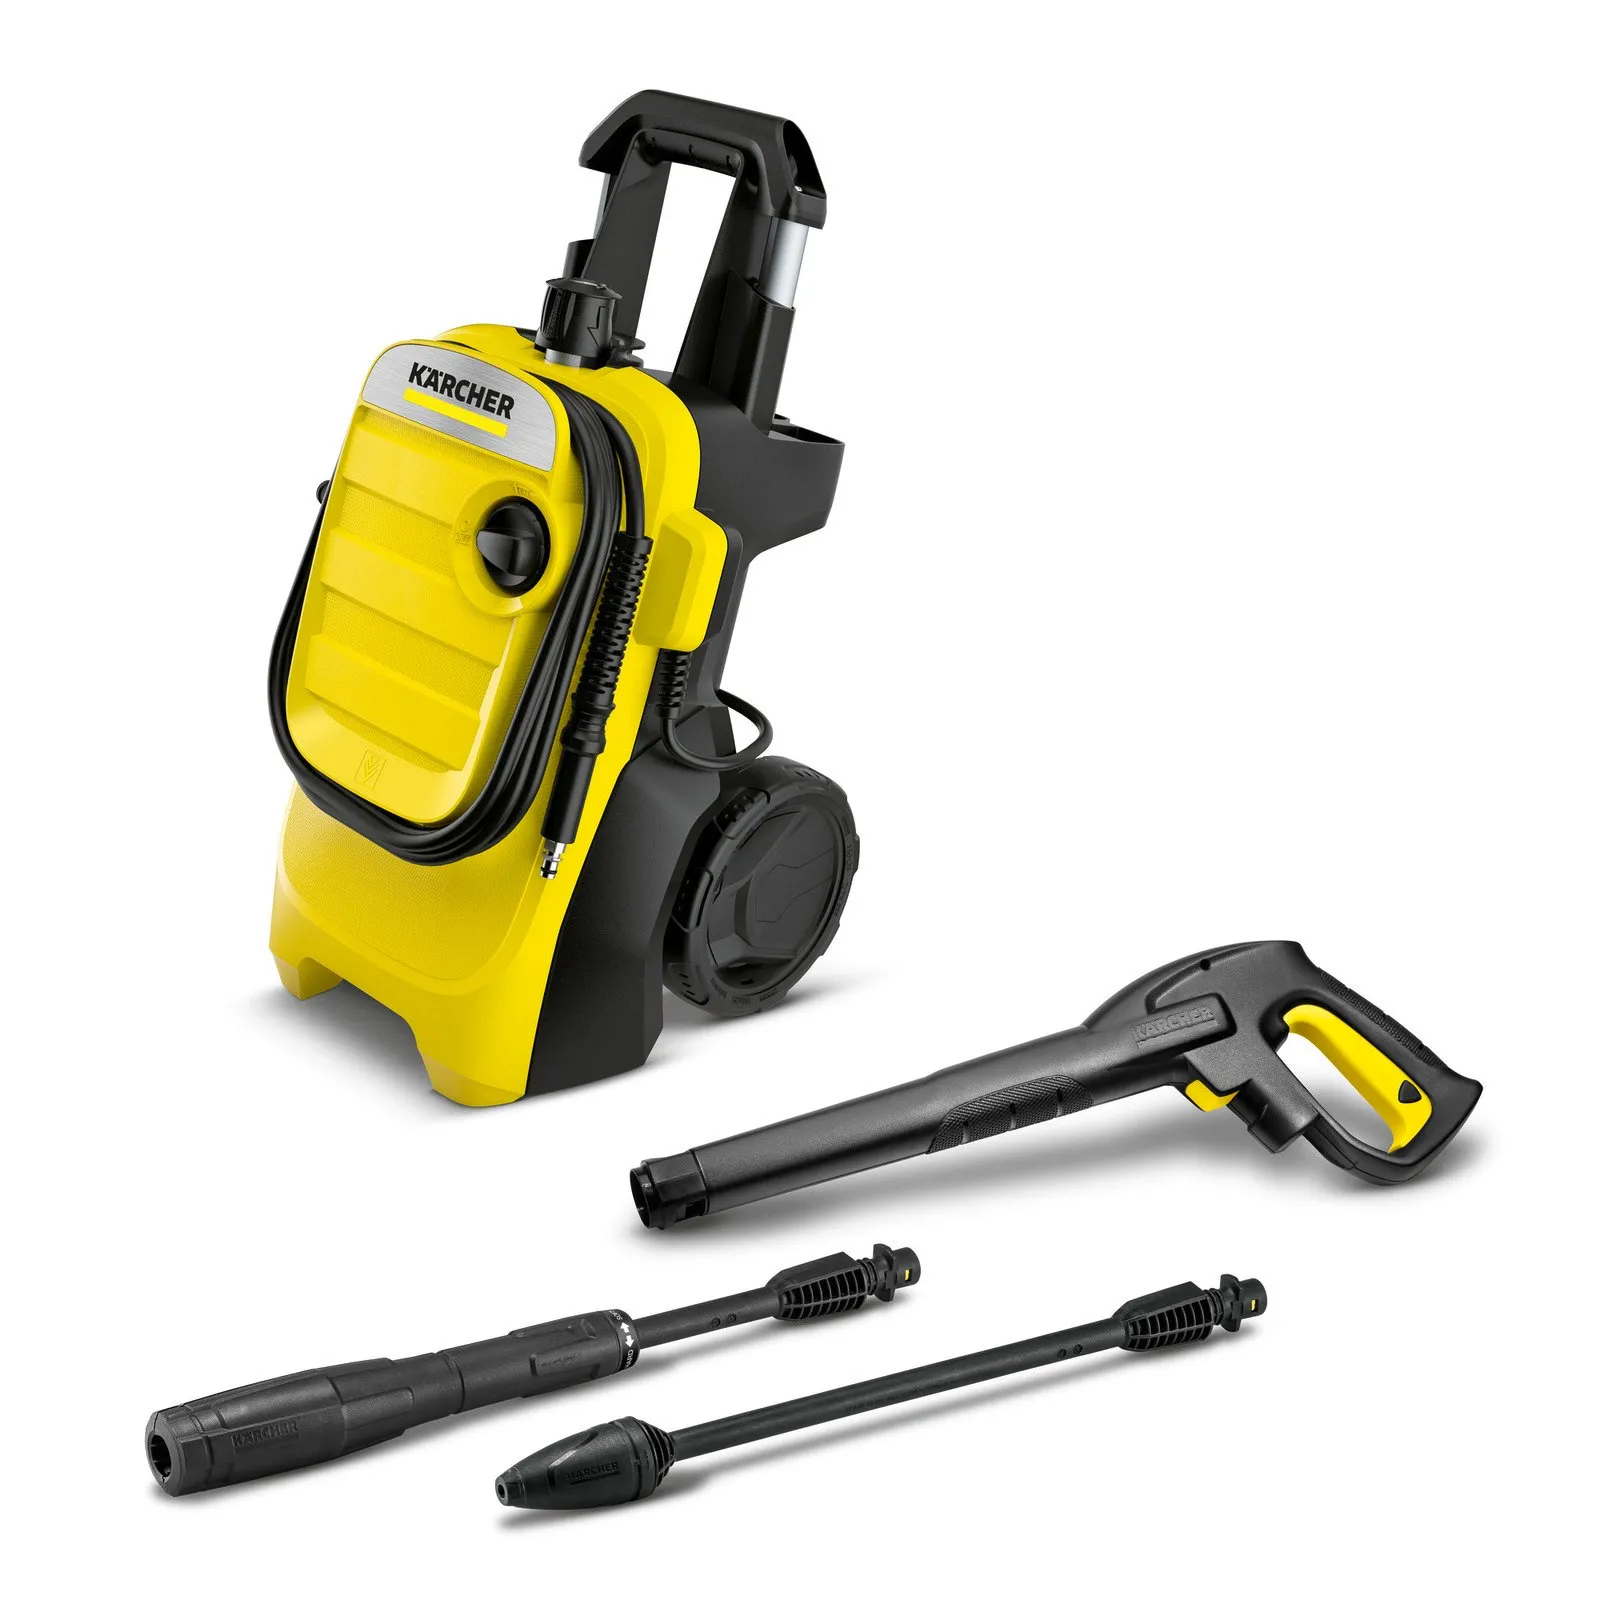 Karcher K7 Compact High Pressure Washer Yellow/Black Color Model – K7 Compact – 1 Year Full Warranty.